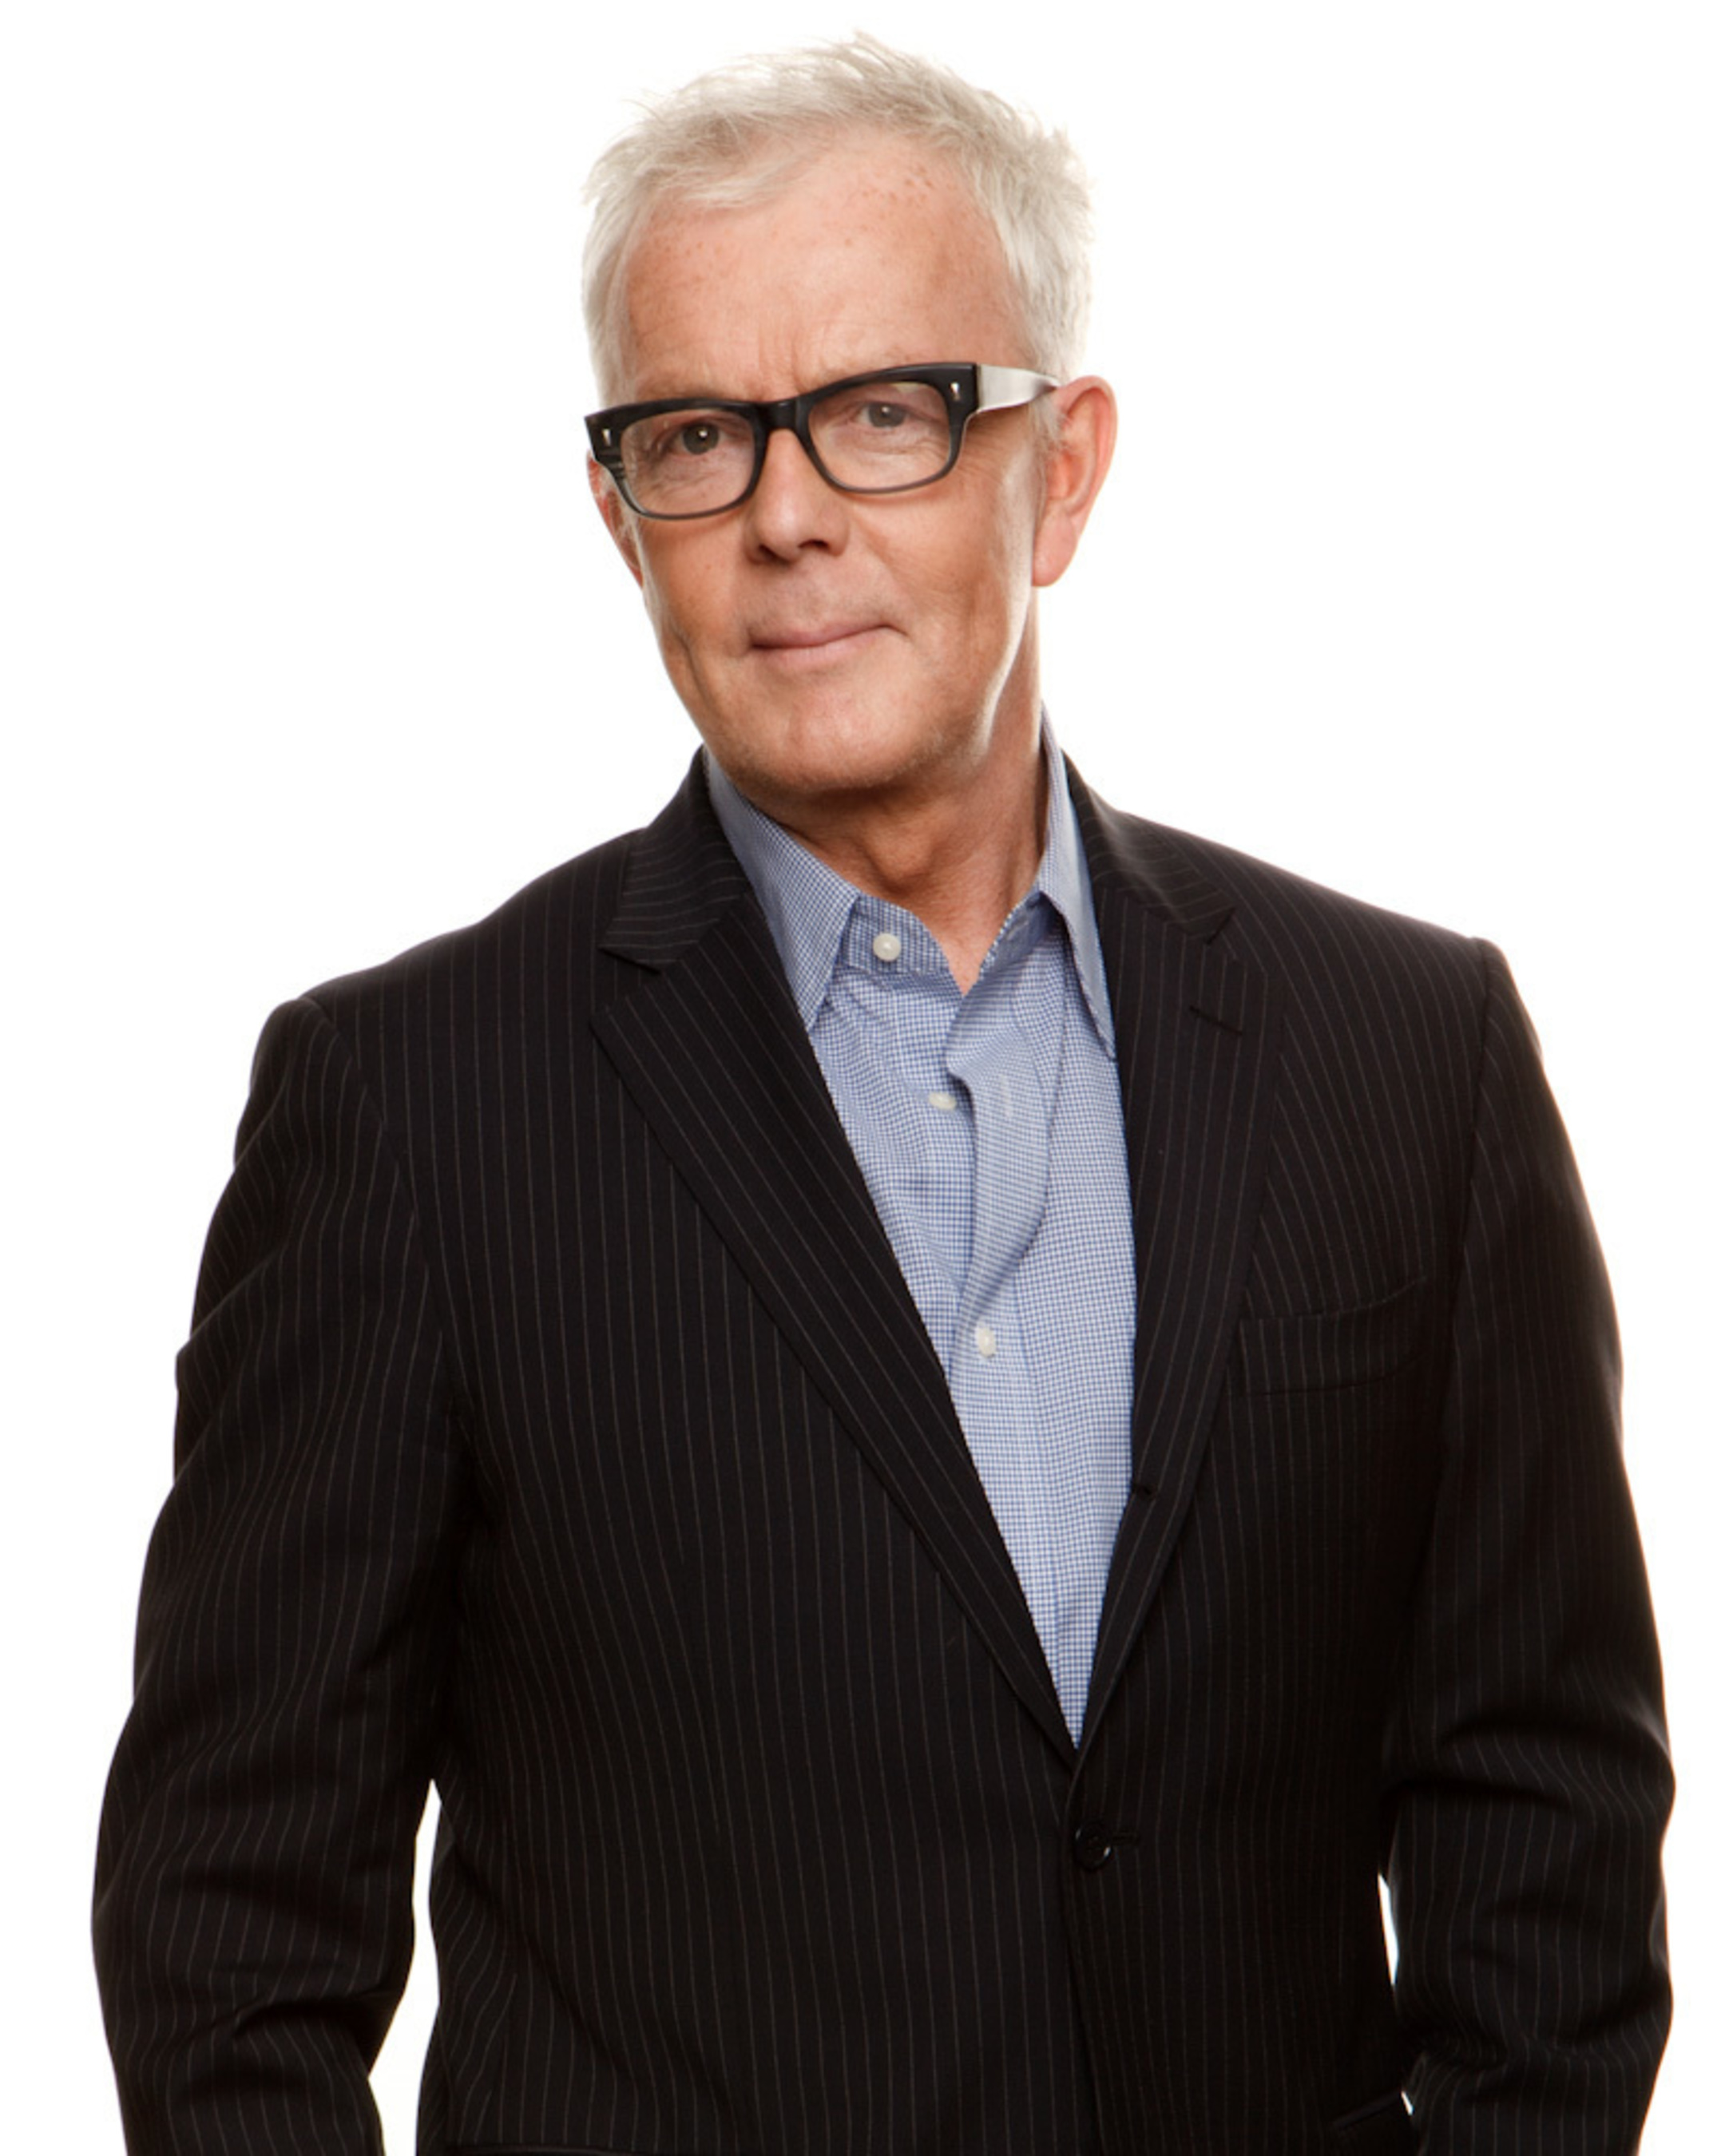 John Barrett, Chairman and Creative Director, John Barrett Holdings. Legendary hairstylist, salon owner, and beauty industry icon known for his transformational work, approachable-yet-sophisticated take on beauty and his "simply chic" style. (PRNewsFoto/John Barrett Holdings )